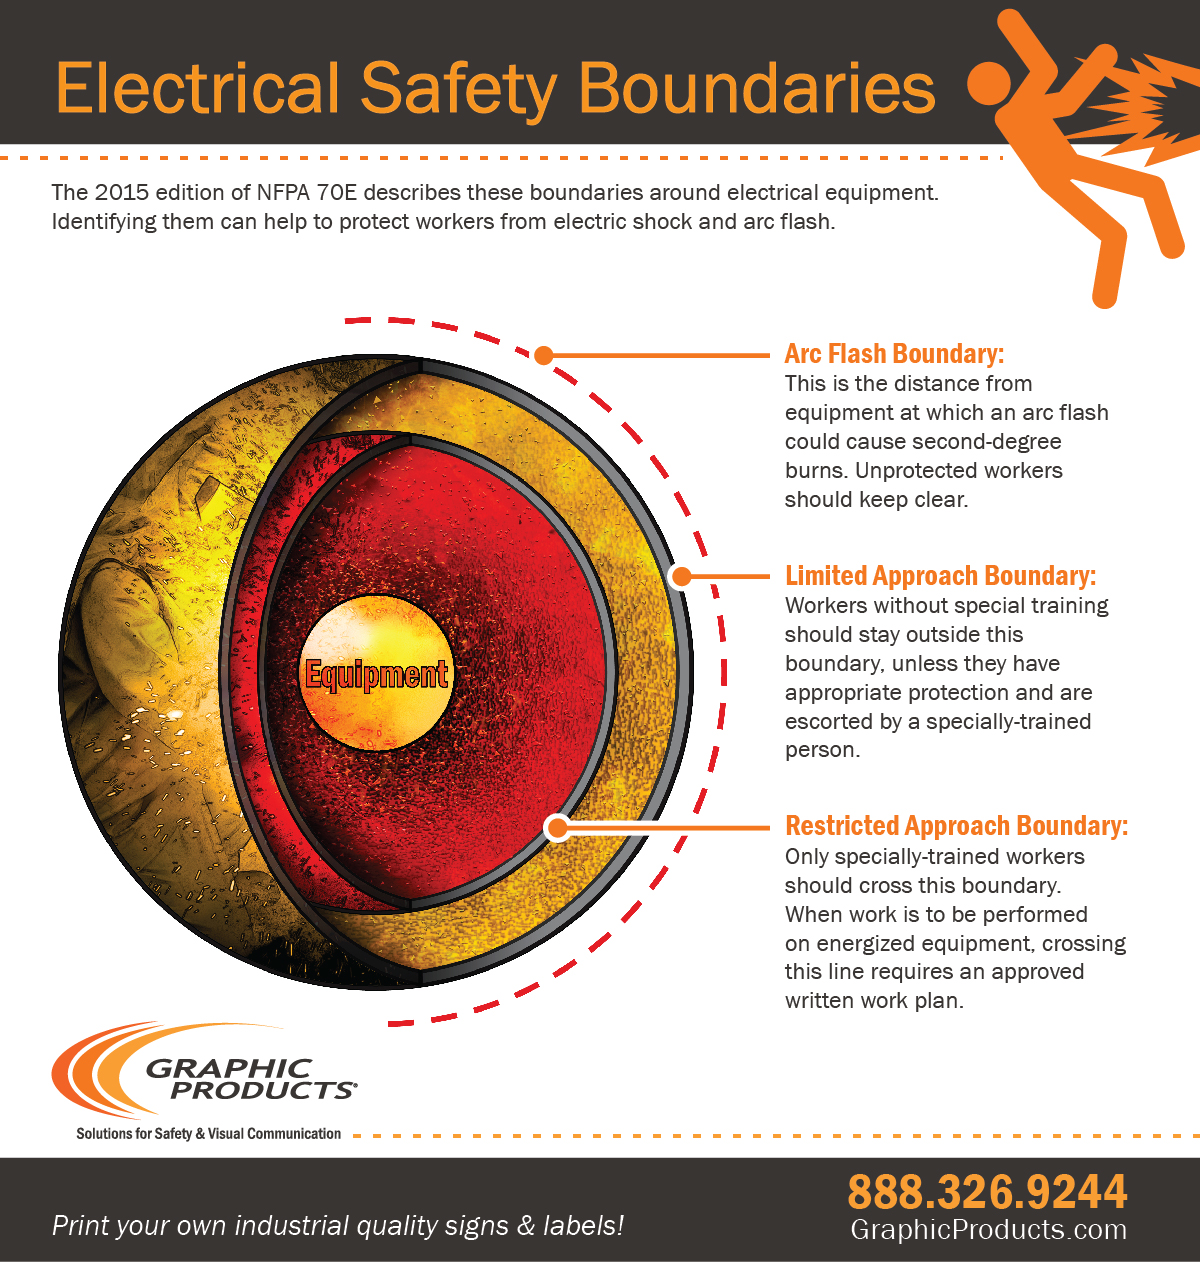 what are arc flash boundaries based on